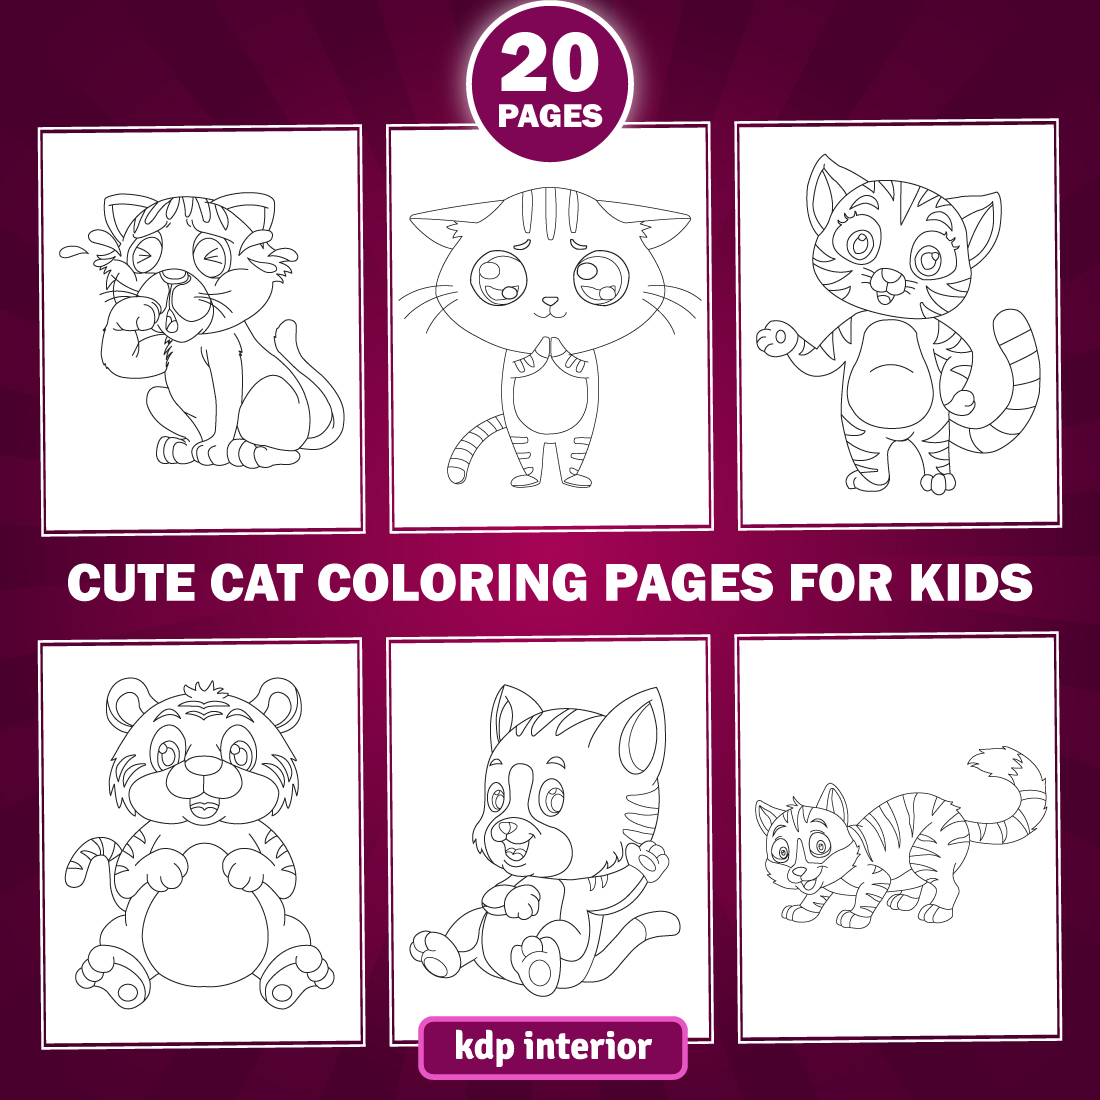 Cat Coloring Pages Template cover image.